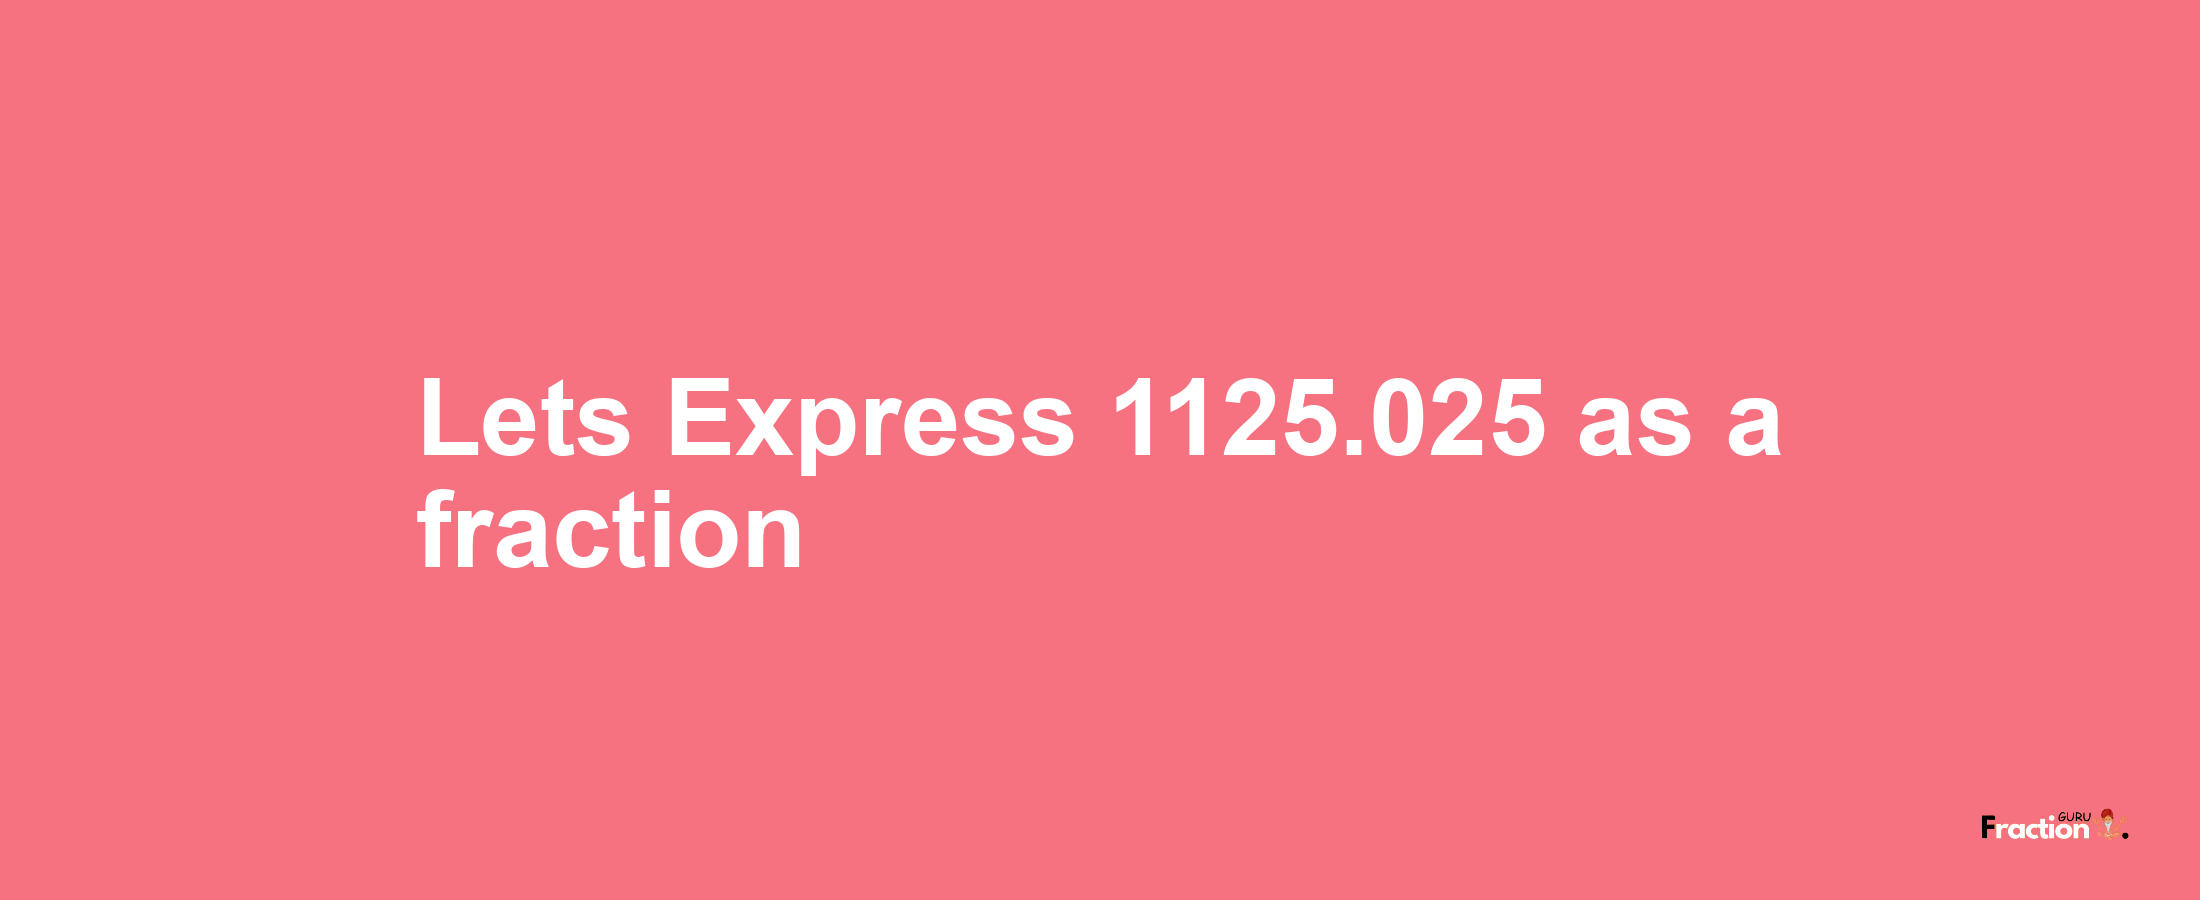 Lets Express 1125.025 as afraction